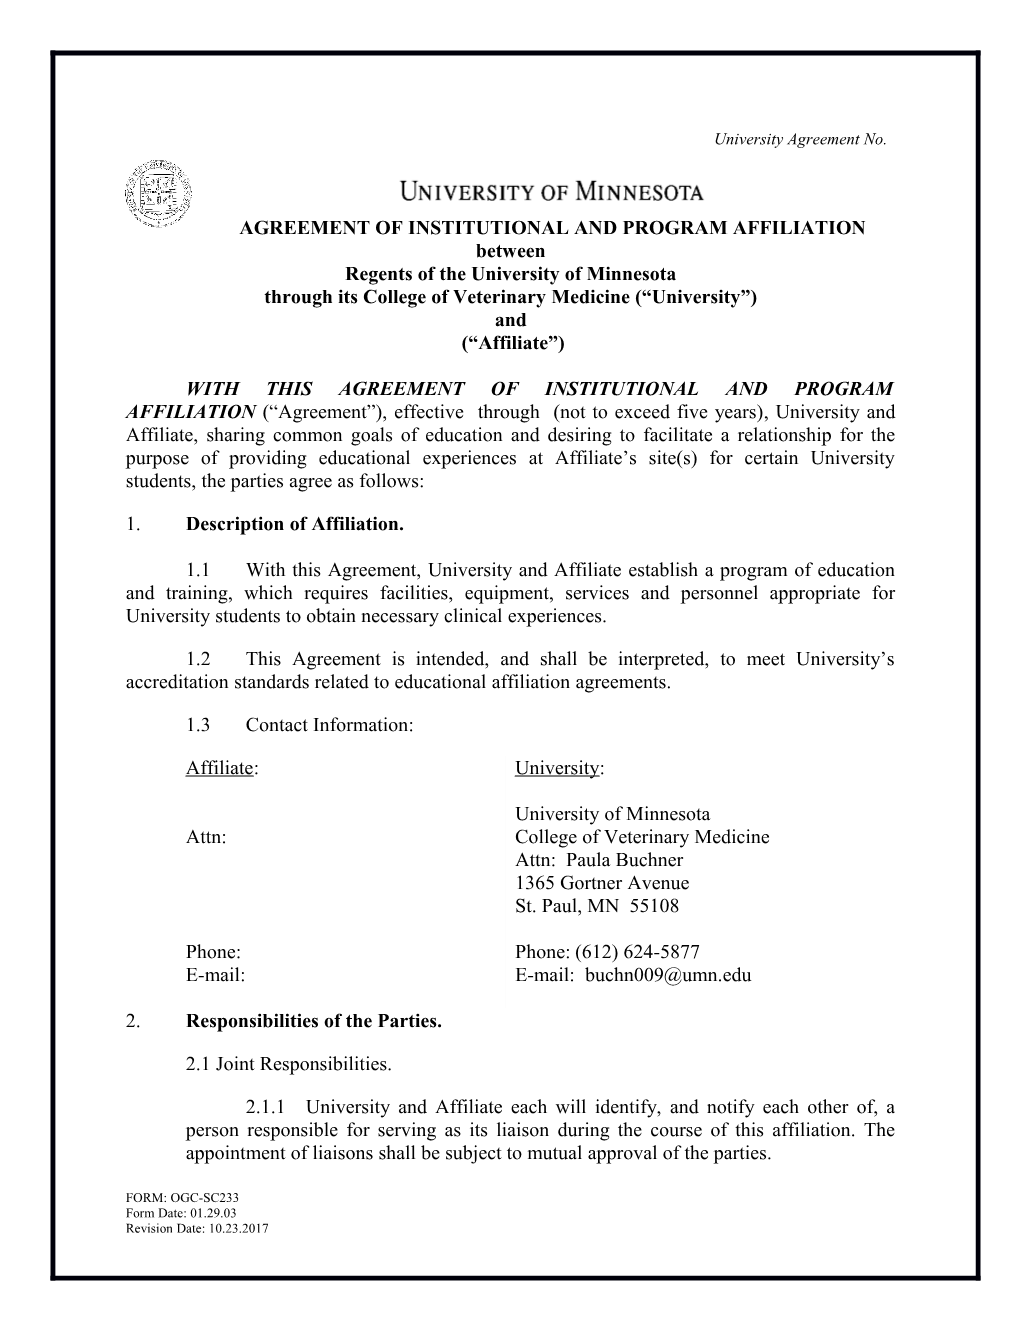 Agreement of Institutional and Program Affiliation